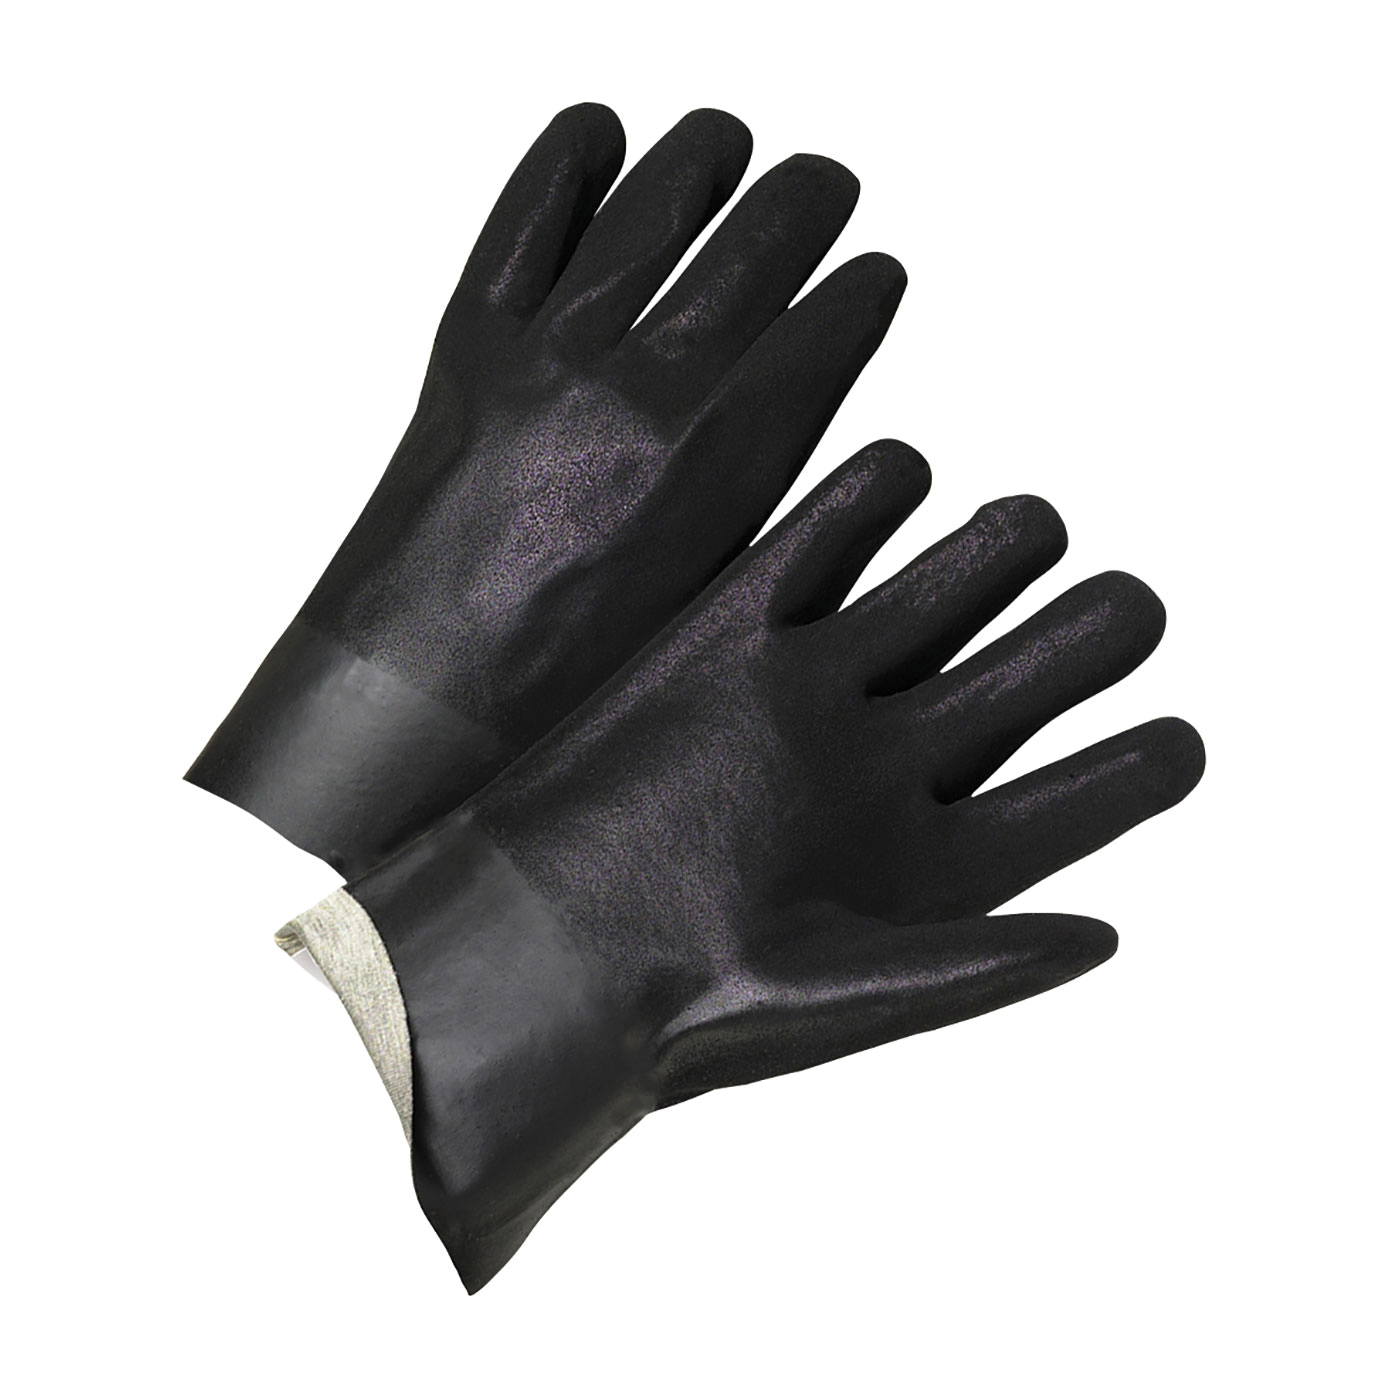 PIP® 1047RF Standard Chemical-Resistant Gloves, L, Pair Hand, Black, Cotton Interlock Knit Lining, 14 in L, Resists: Abrasion, Acid, Chemical, Grease, Oil, Water and Solvent, Supported Support, Gauntlet Cuff